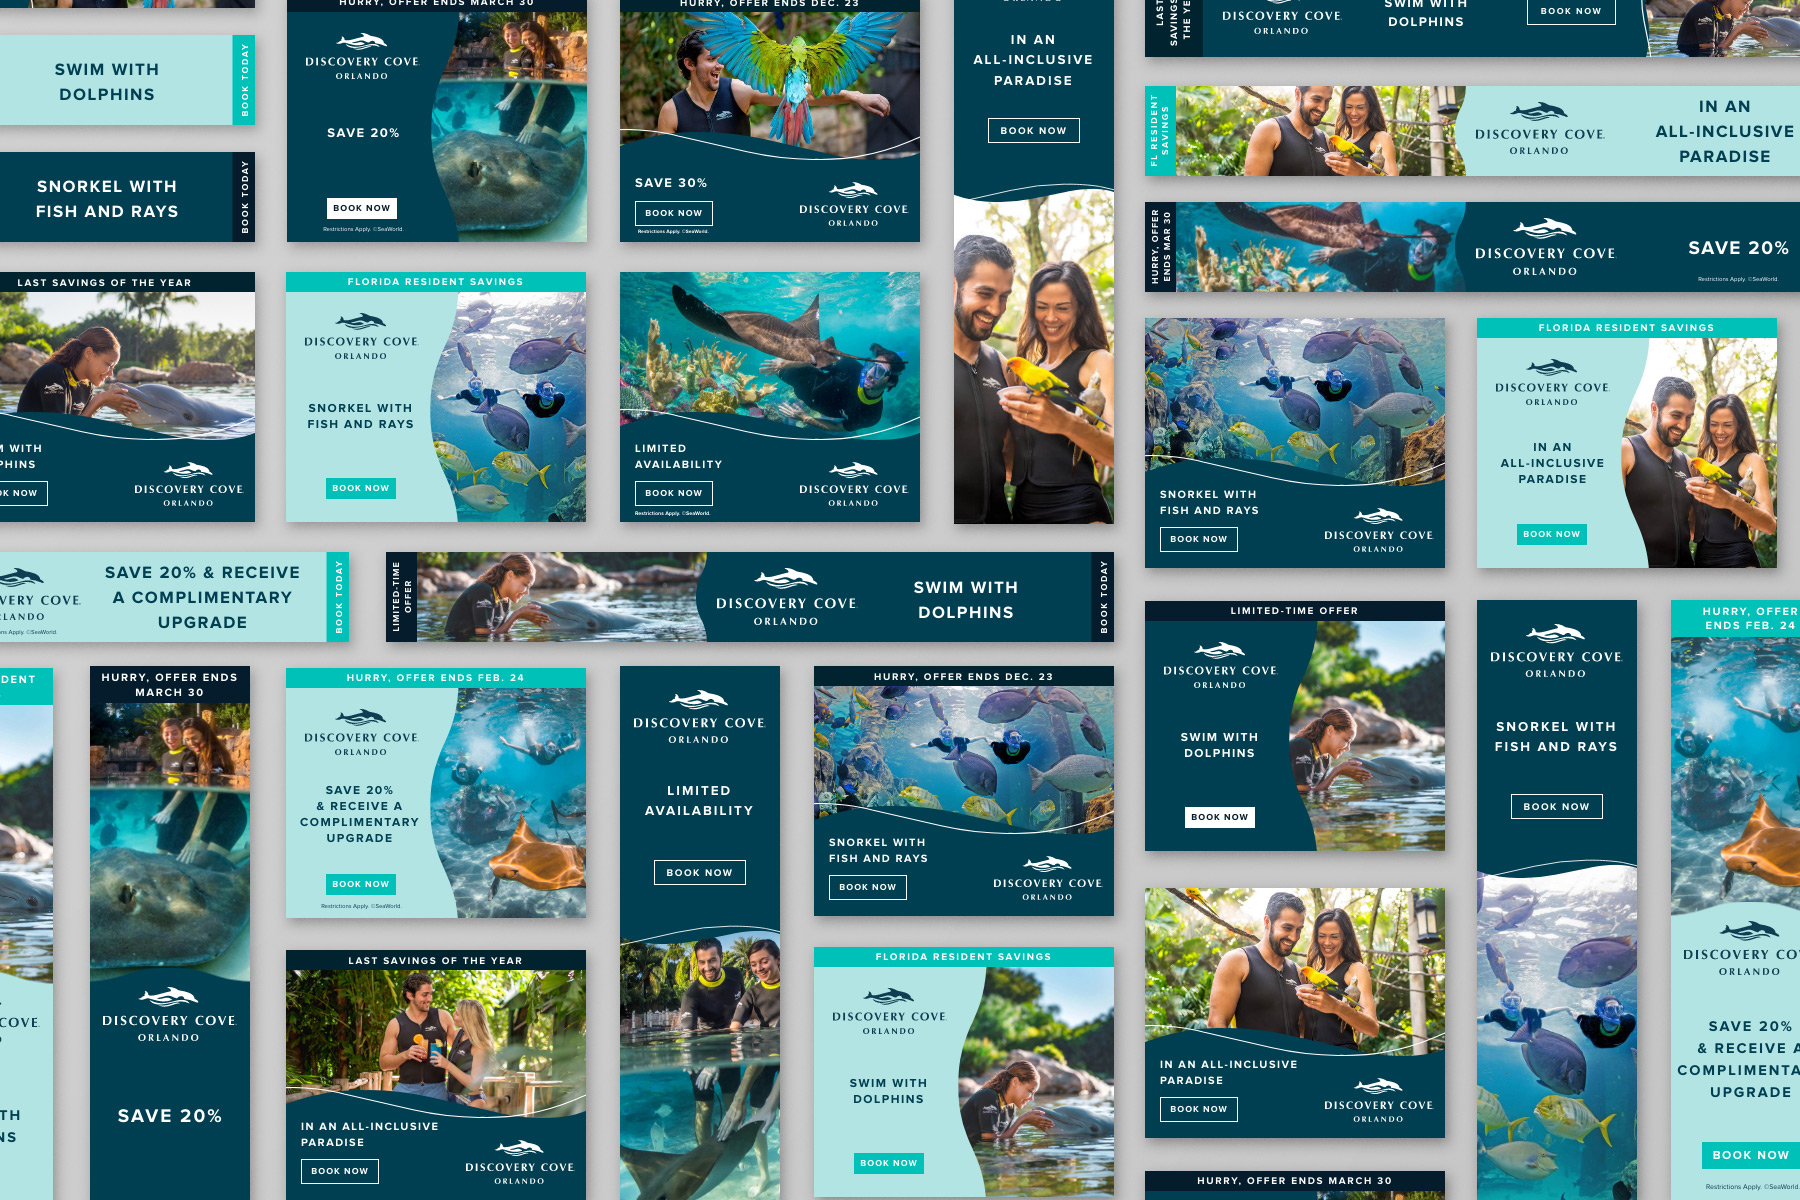 SeaWorld Discovery Cove Banners